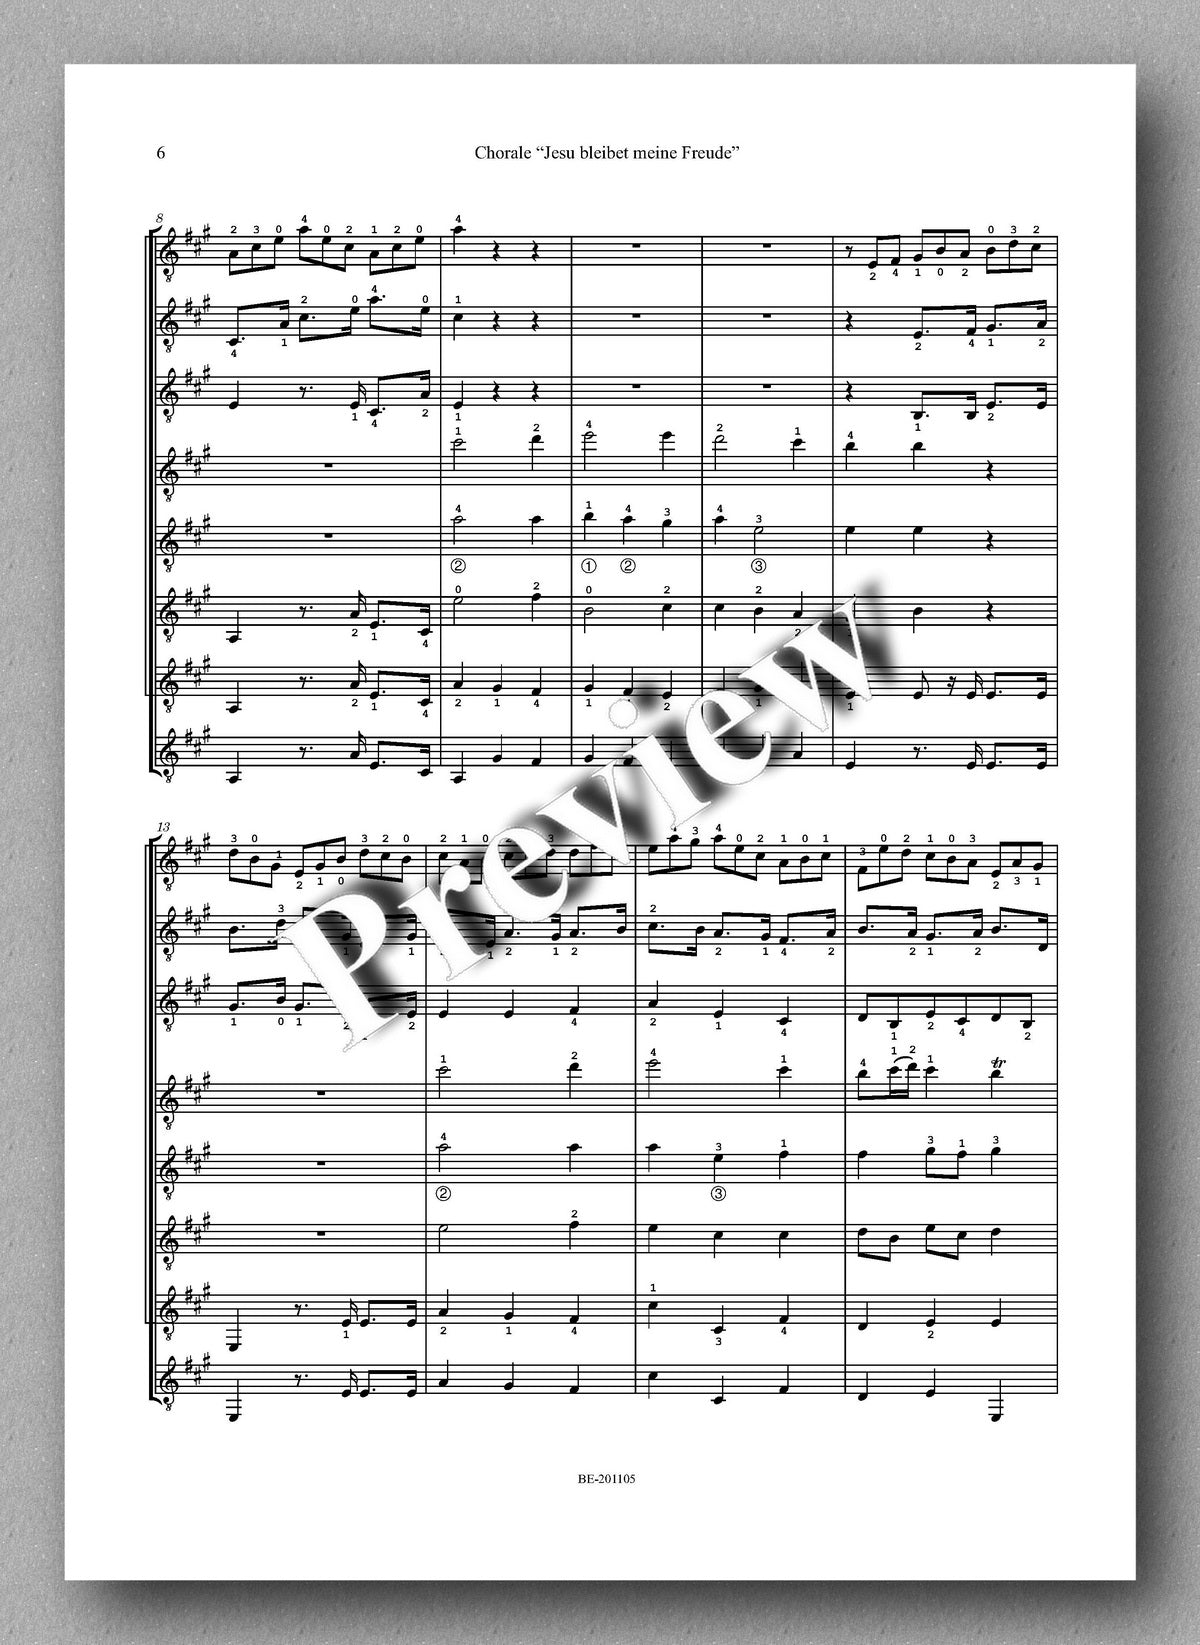 J.S. Bach, Chorale - preview of the music score 2